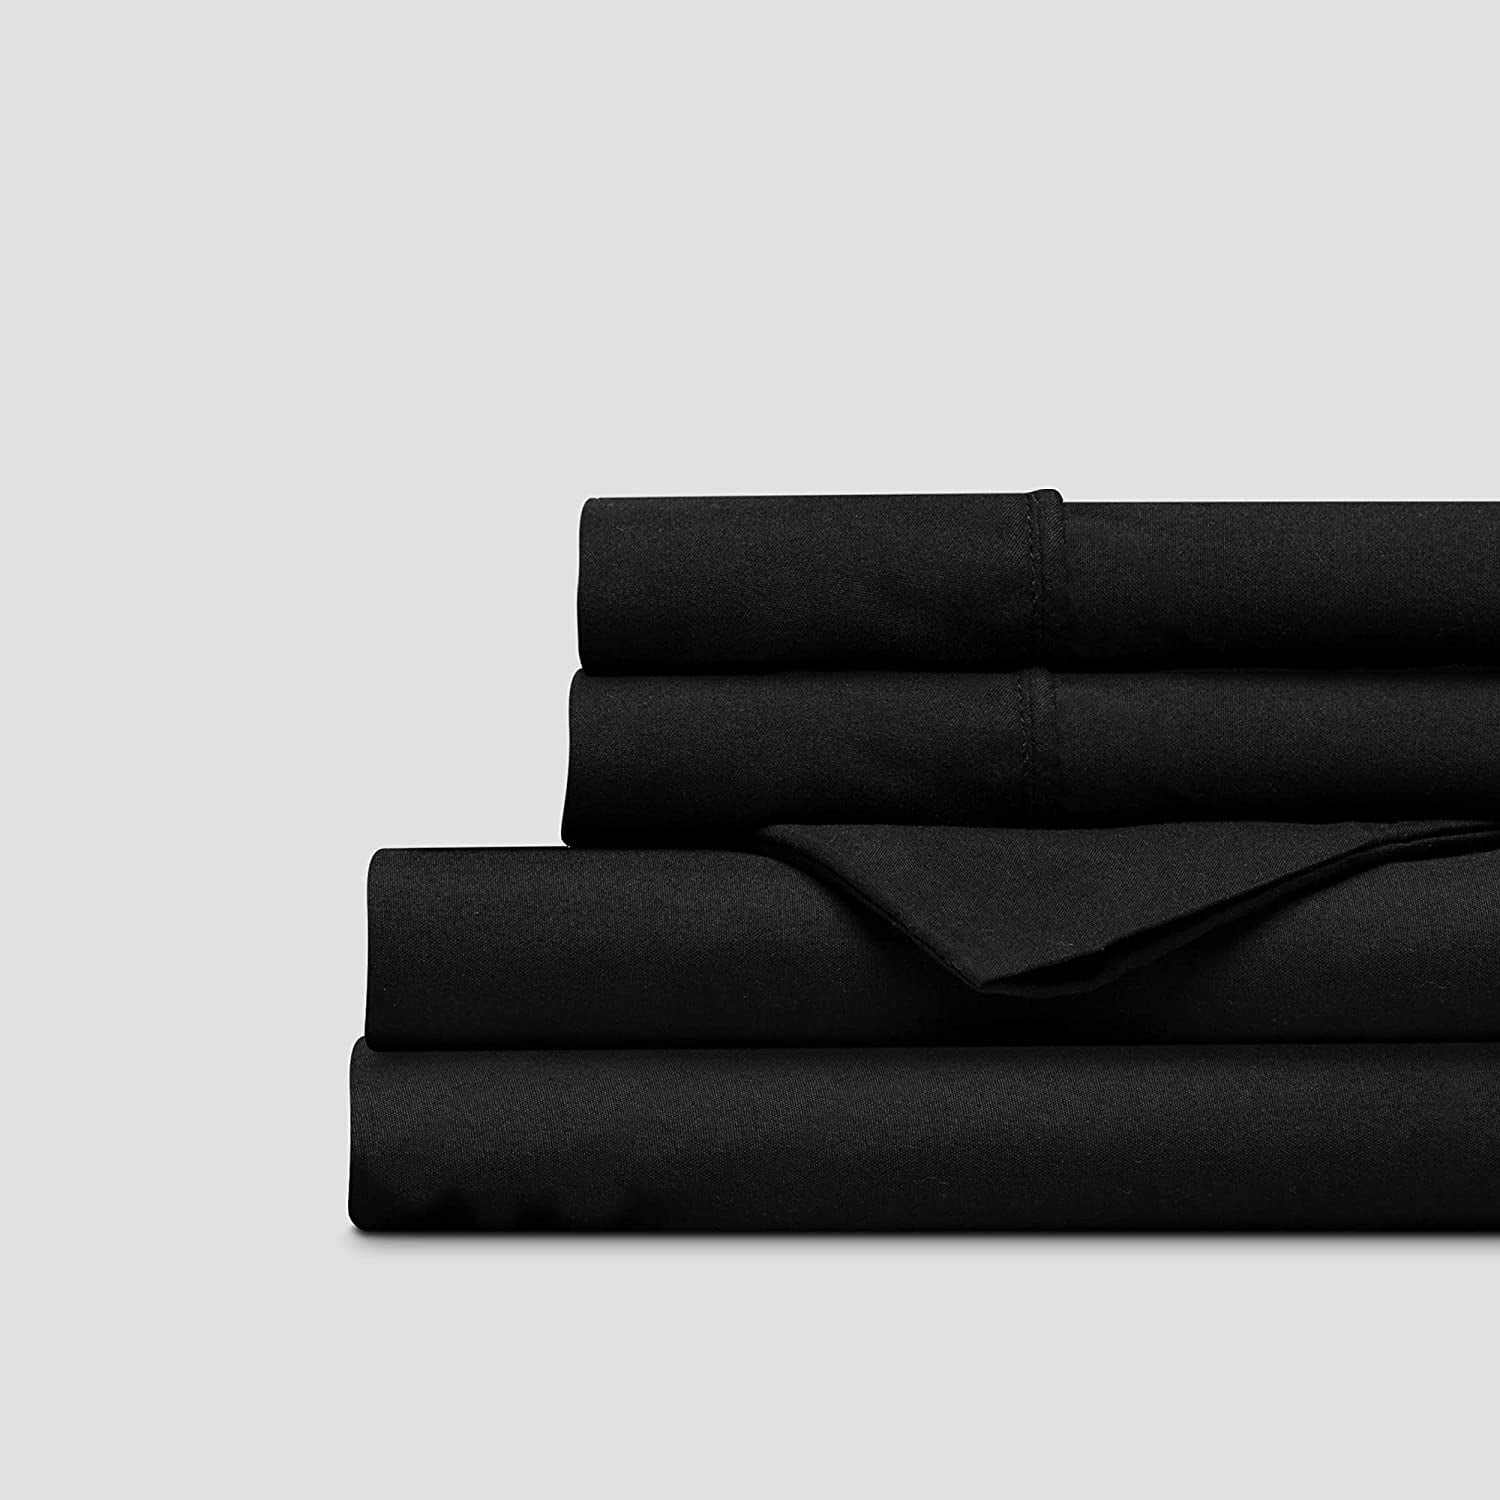 Details about   Export~Quality Sheet Set Extra Deep Pkt All Size & Black Solid 1000TC 100%Cotton 